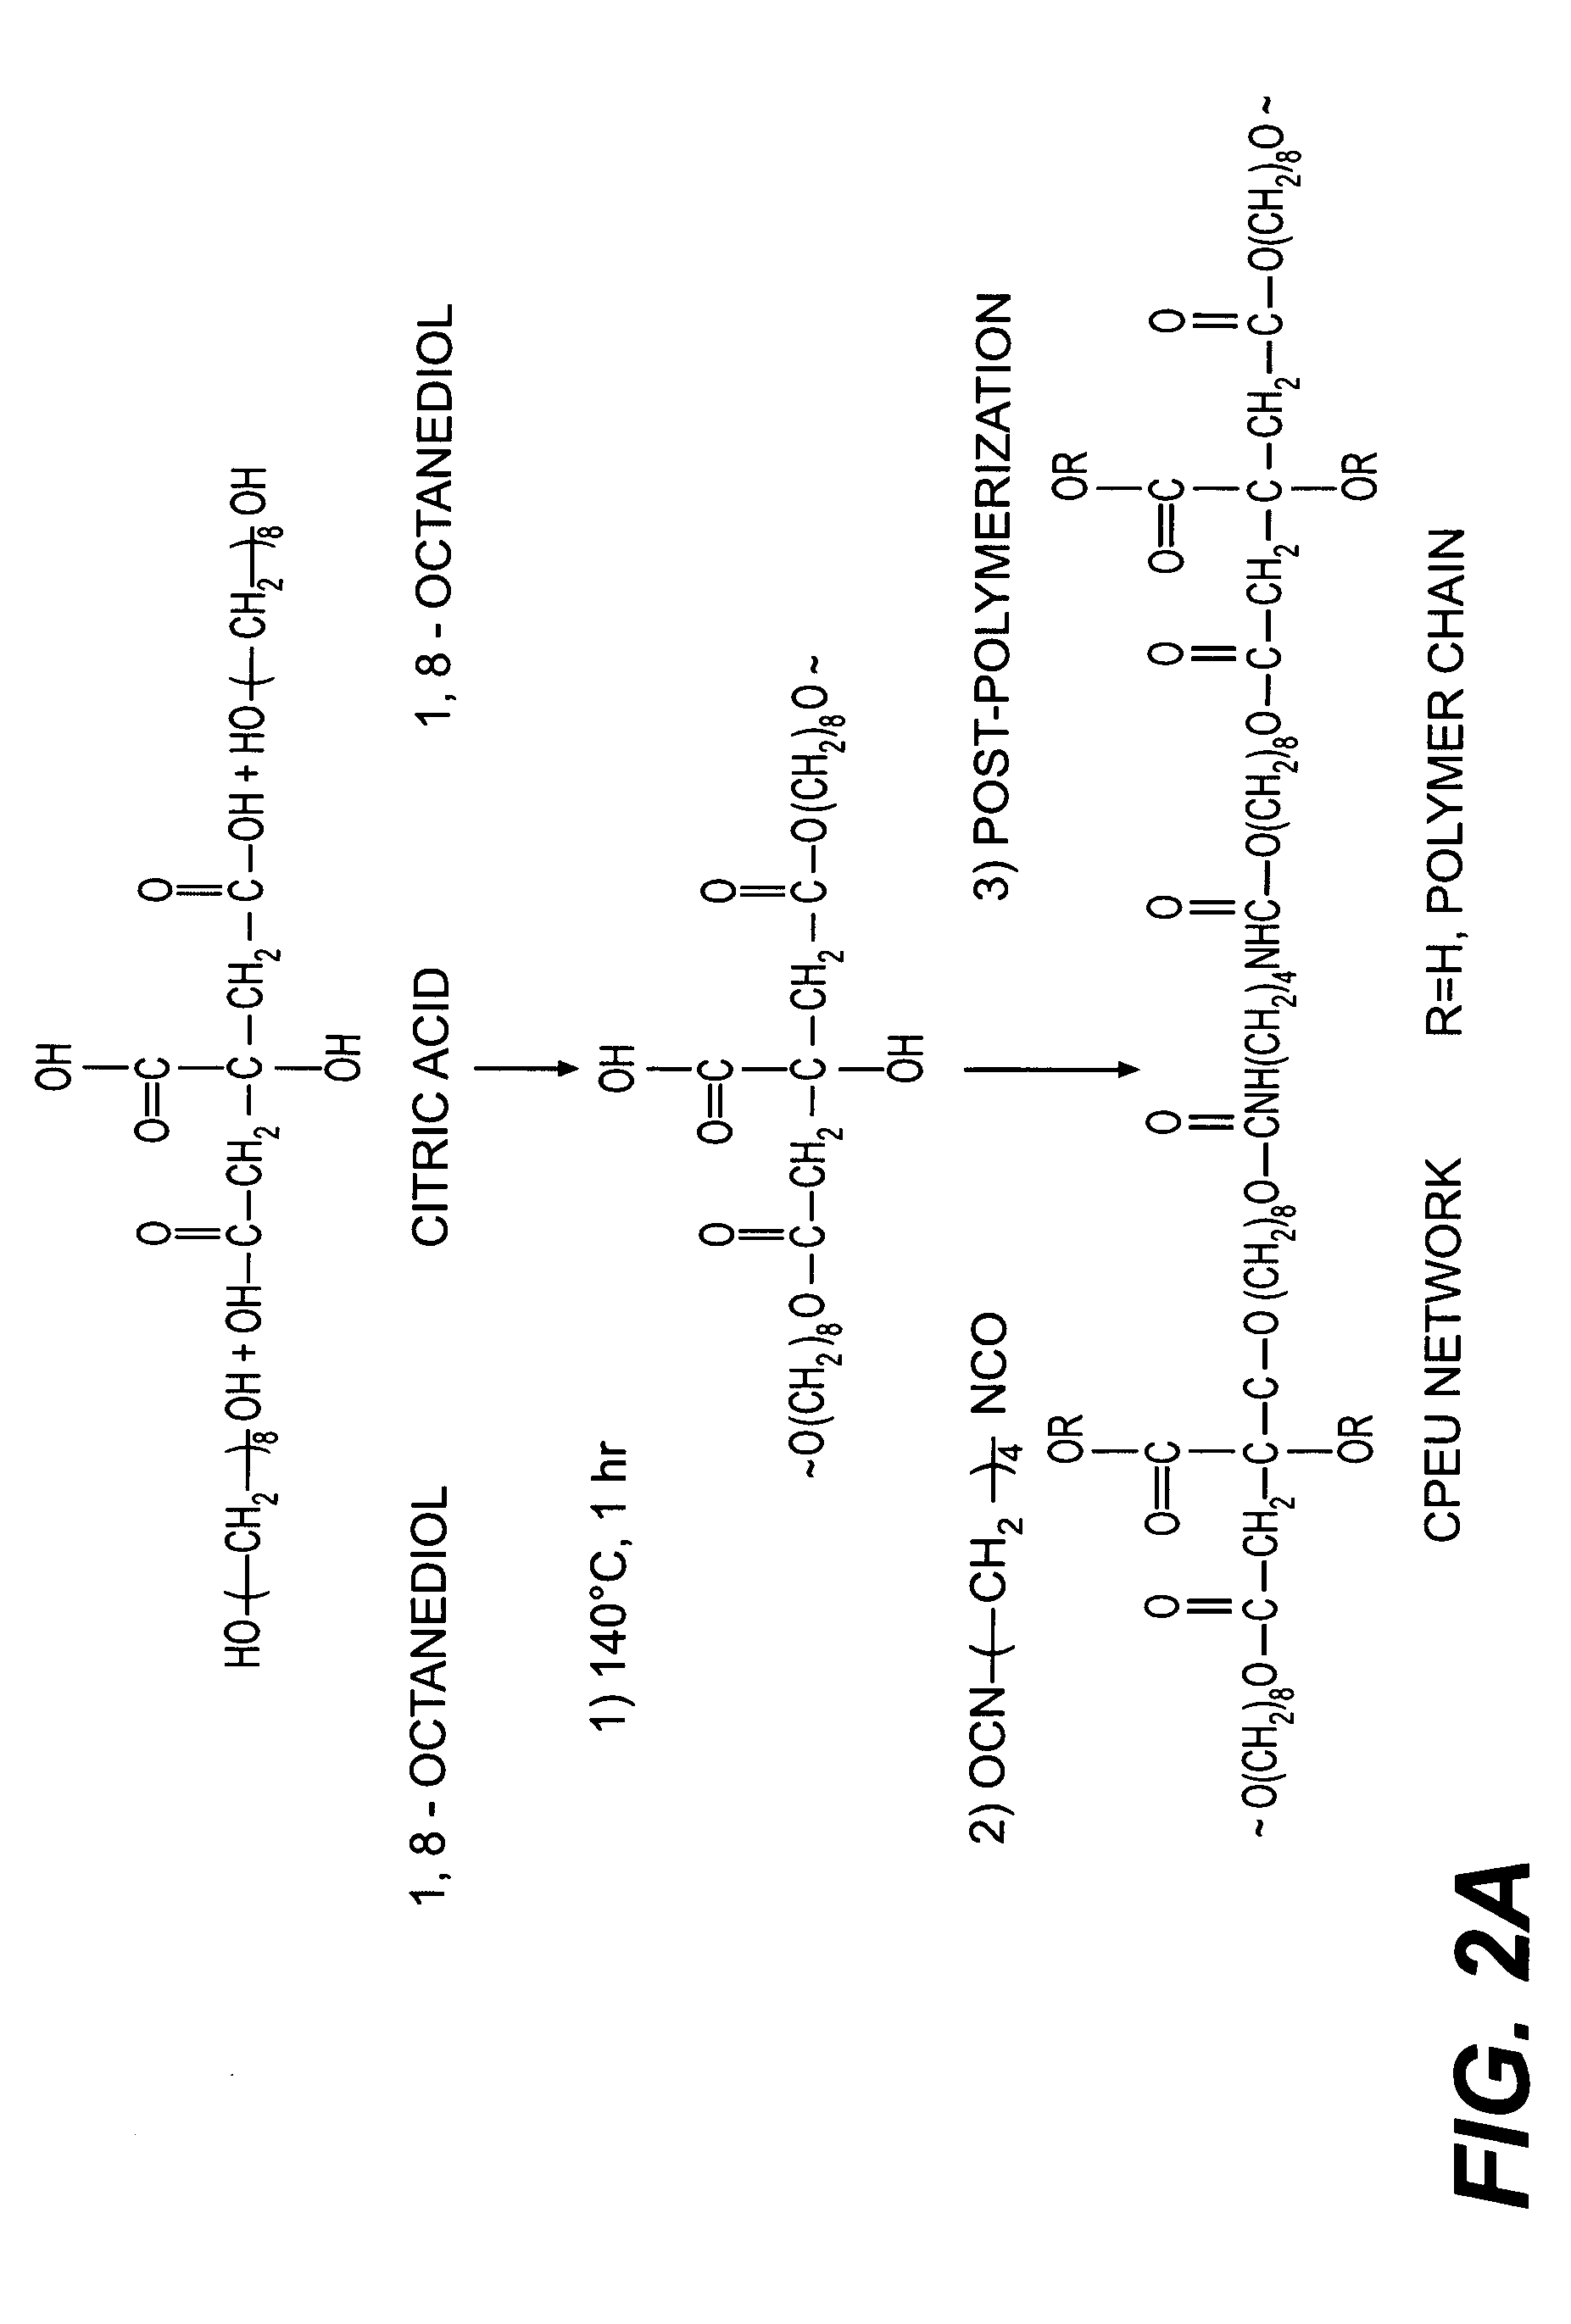 Bio-polymer and scaffold-sheet method for tissue engineering